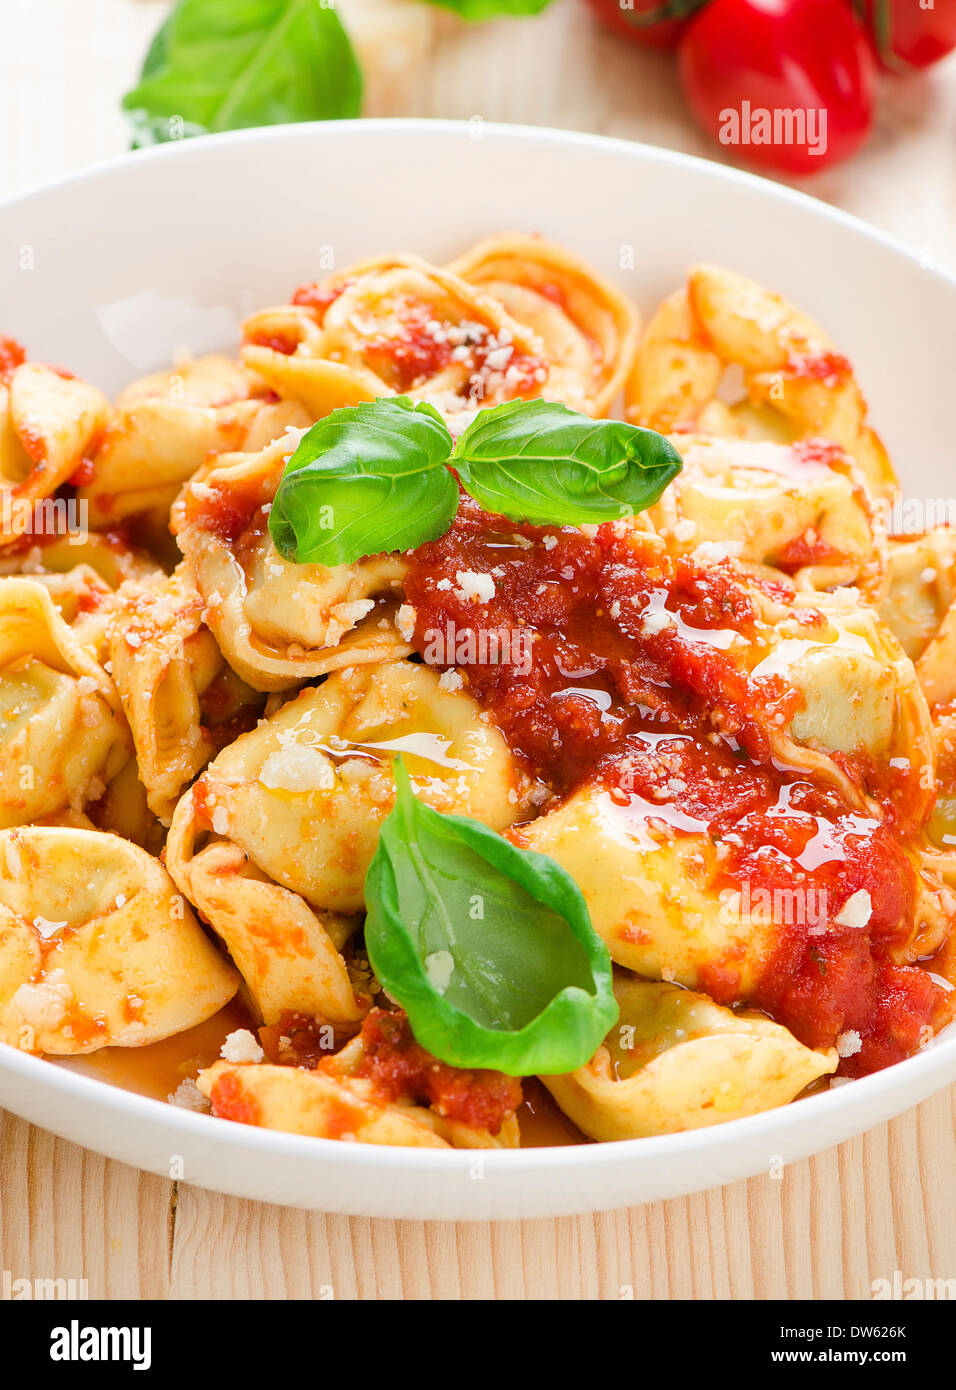 Tortellini with tomato sauce and cheese Stock Photo